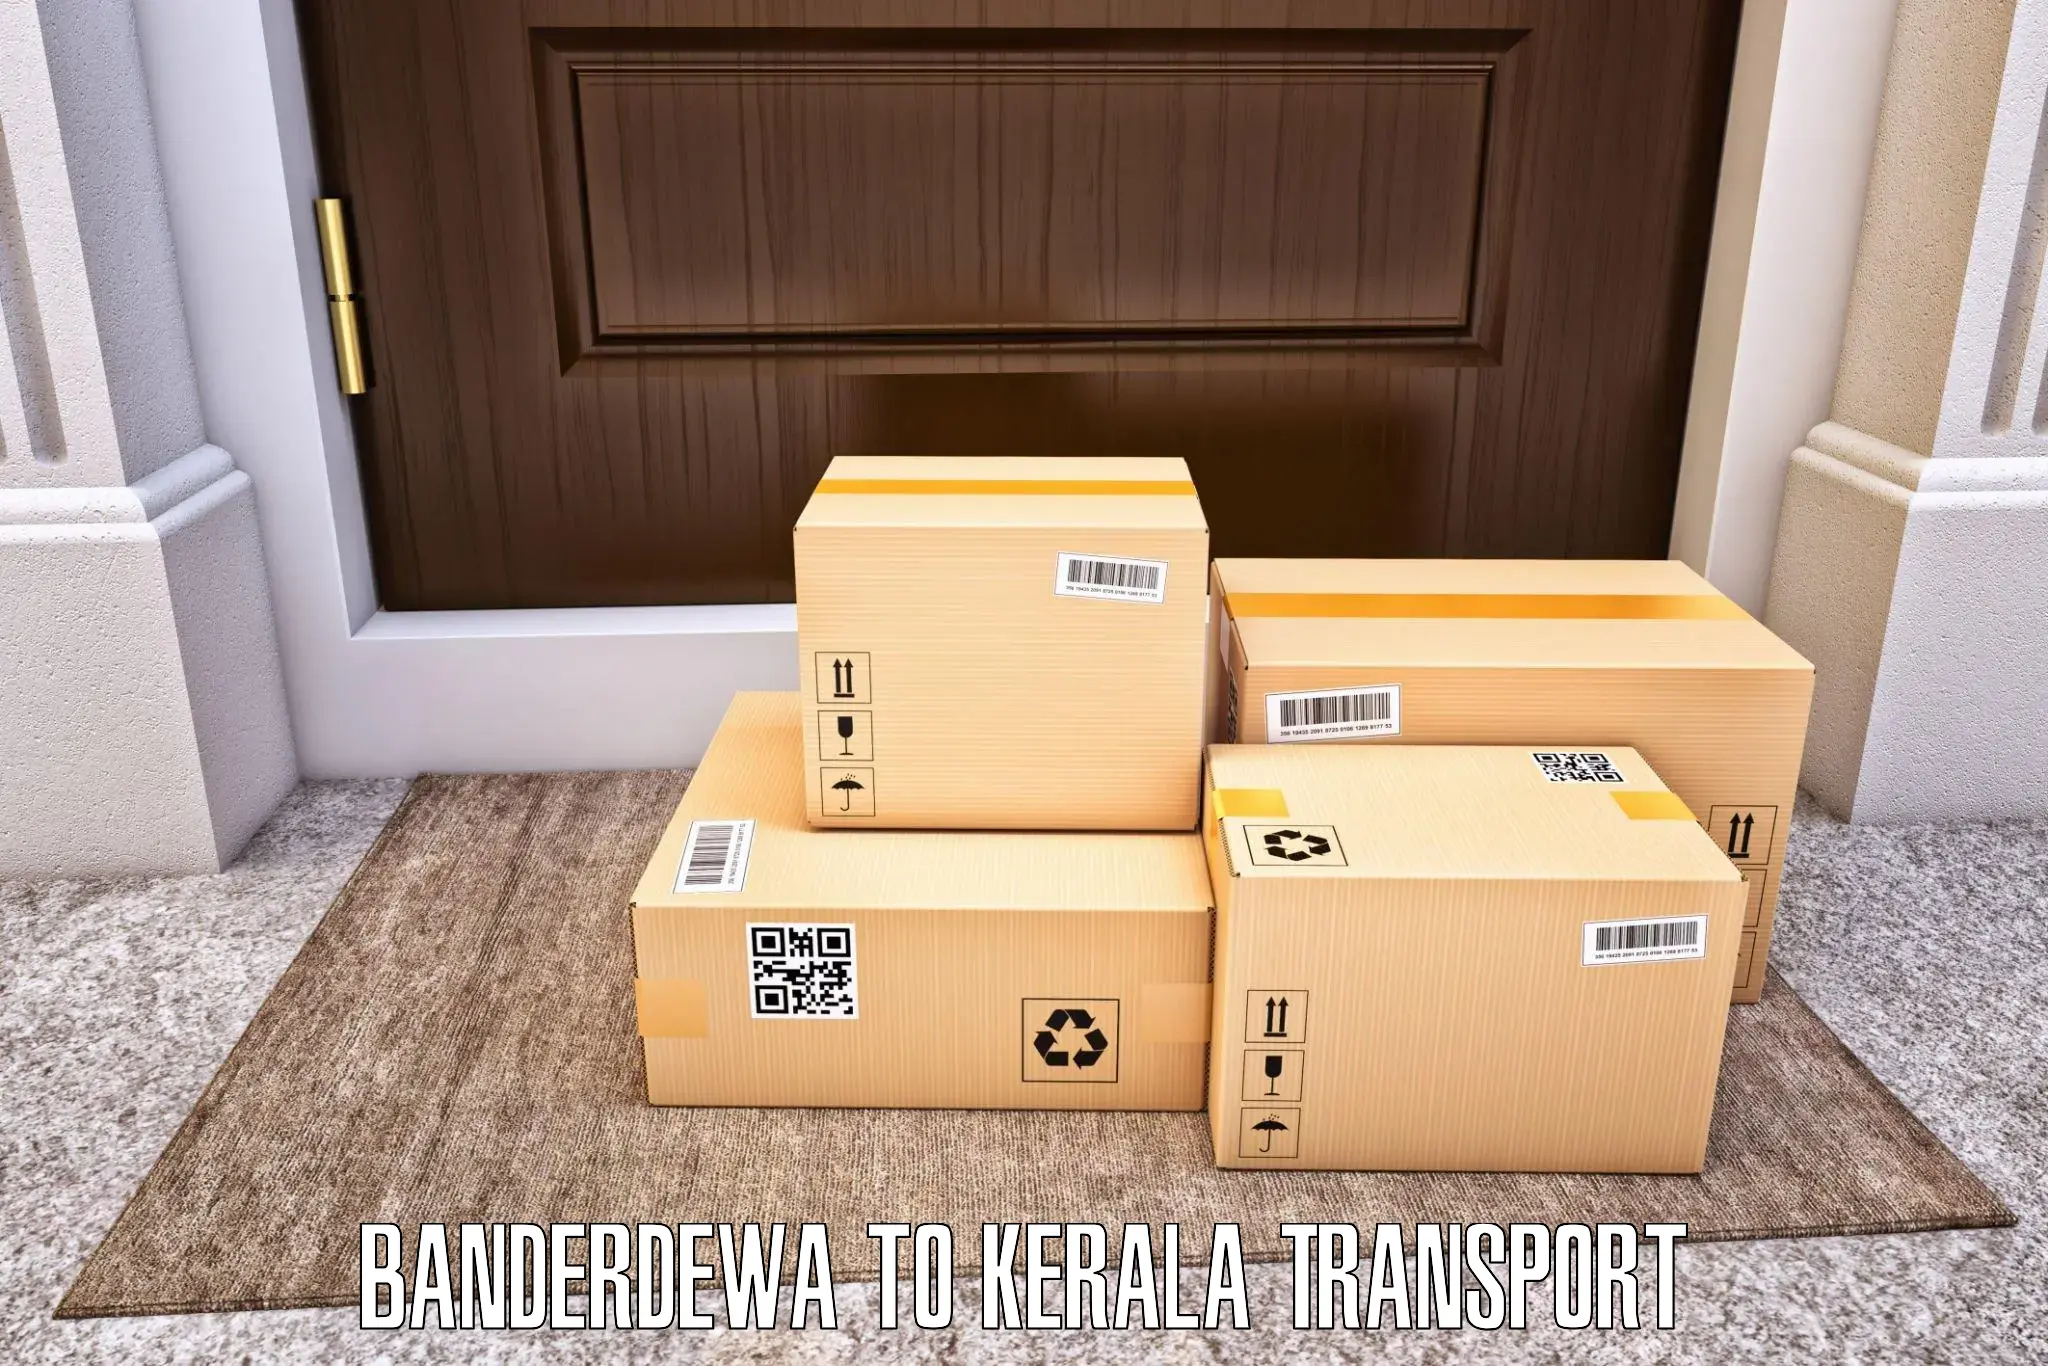 Sending bike to another city in Banderdewa to Munnar